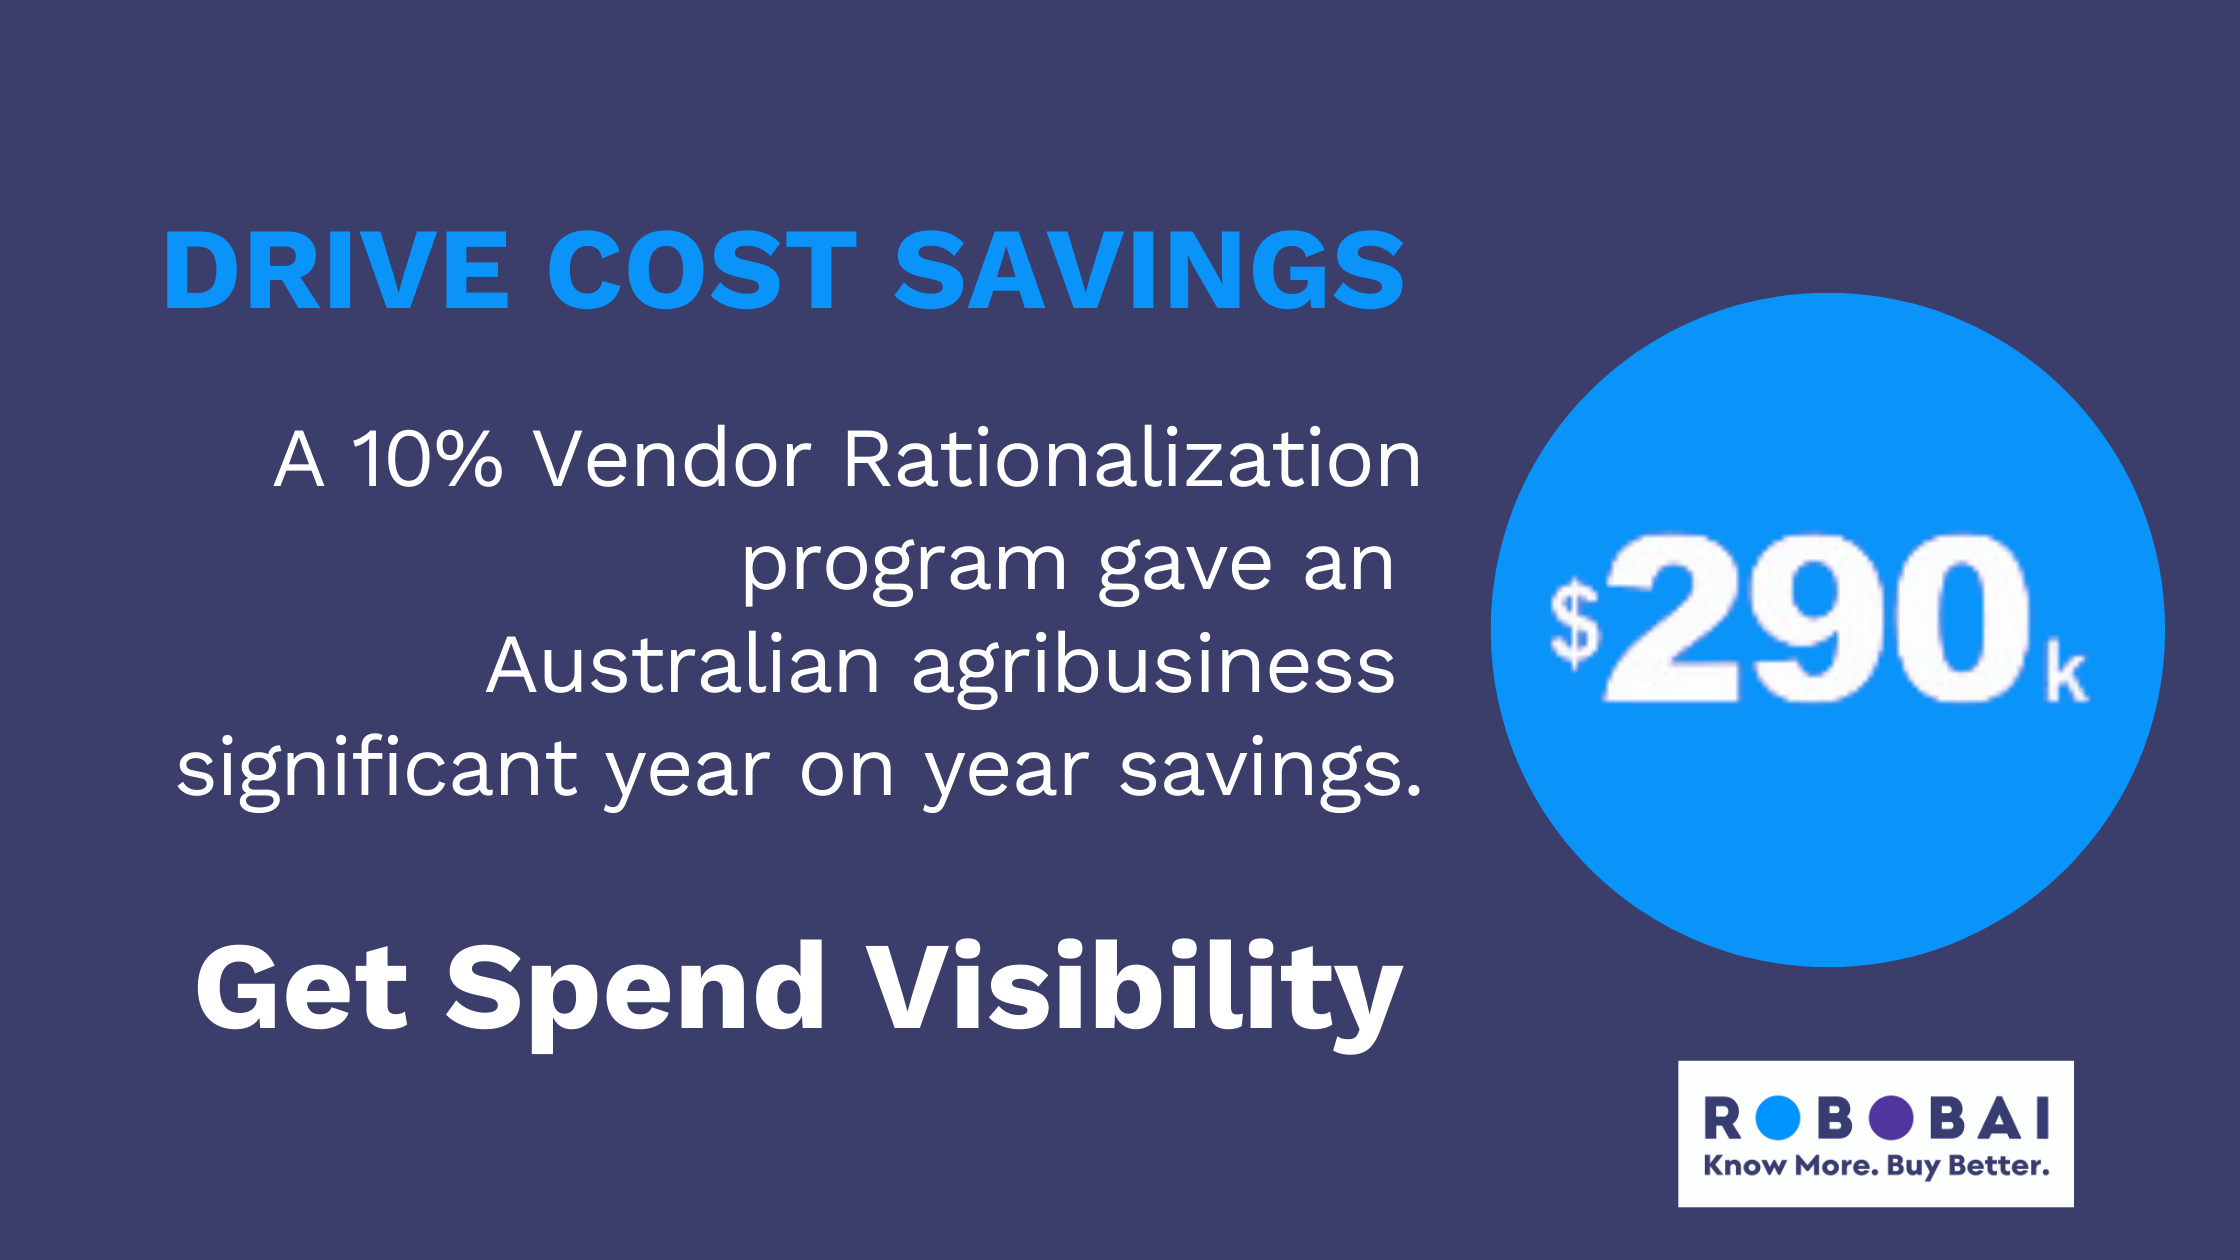 Get spend visibility and drive cost savings